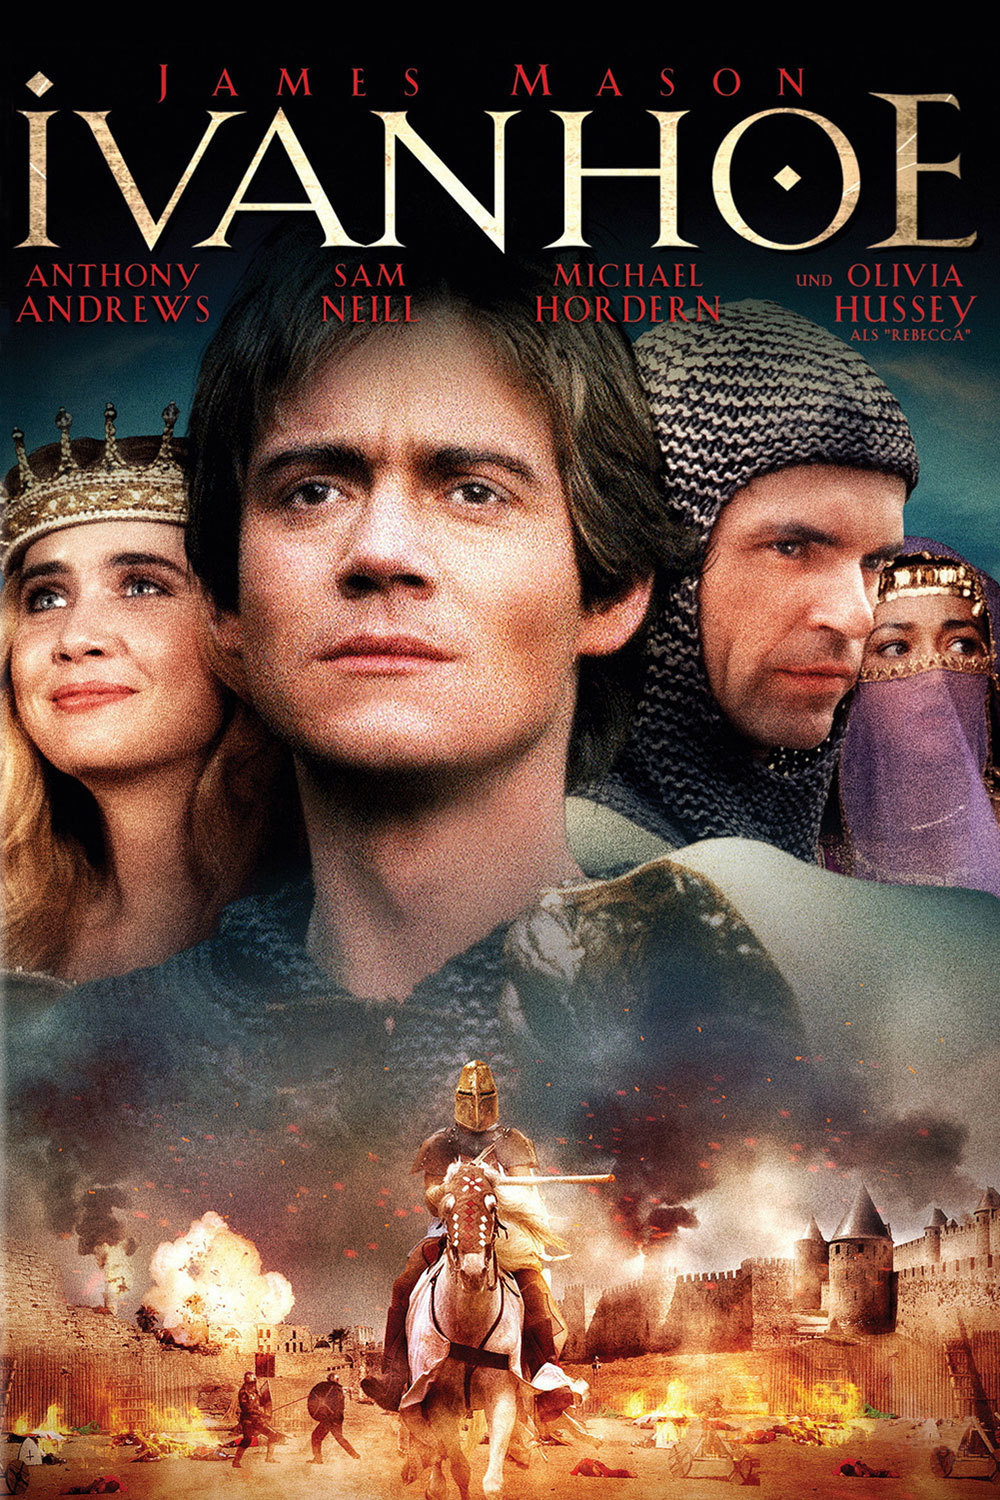 Poster for the movie "Ivanhoe"